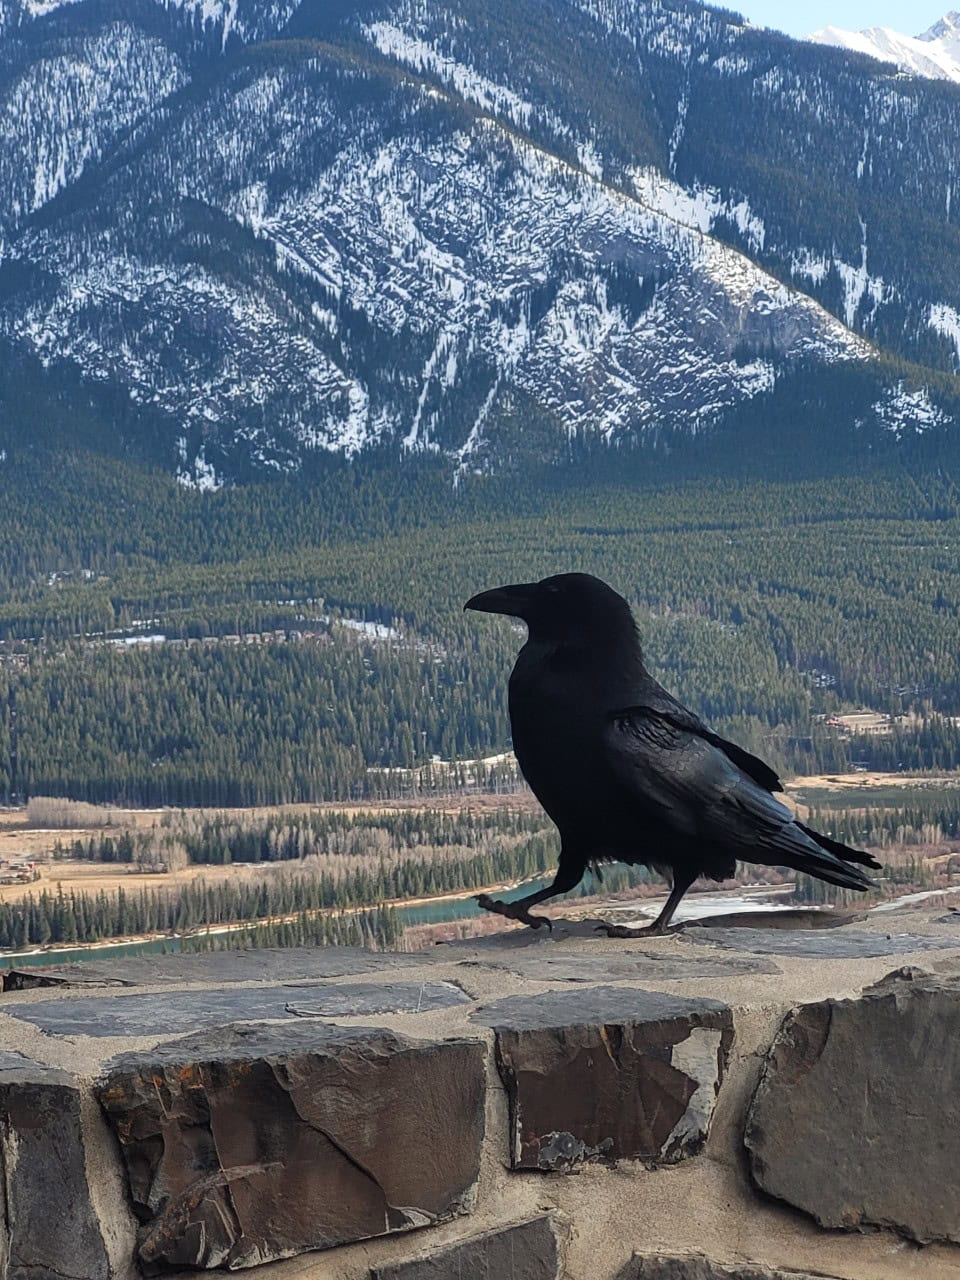 Funny Black Raven - Banff Alberta Canada - Black Raven strutting his stuff while entertaining visitors to the Mount Norquay Lookout Point.
Banff, Alberta, Canada